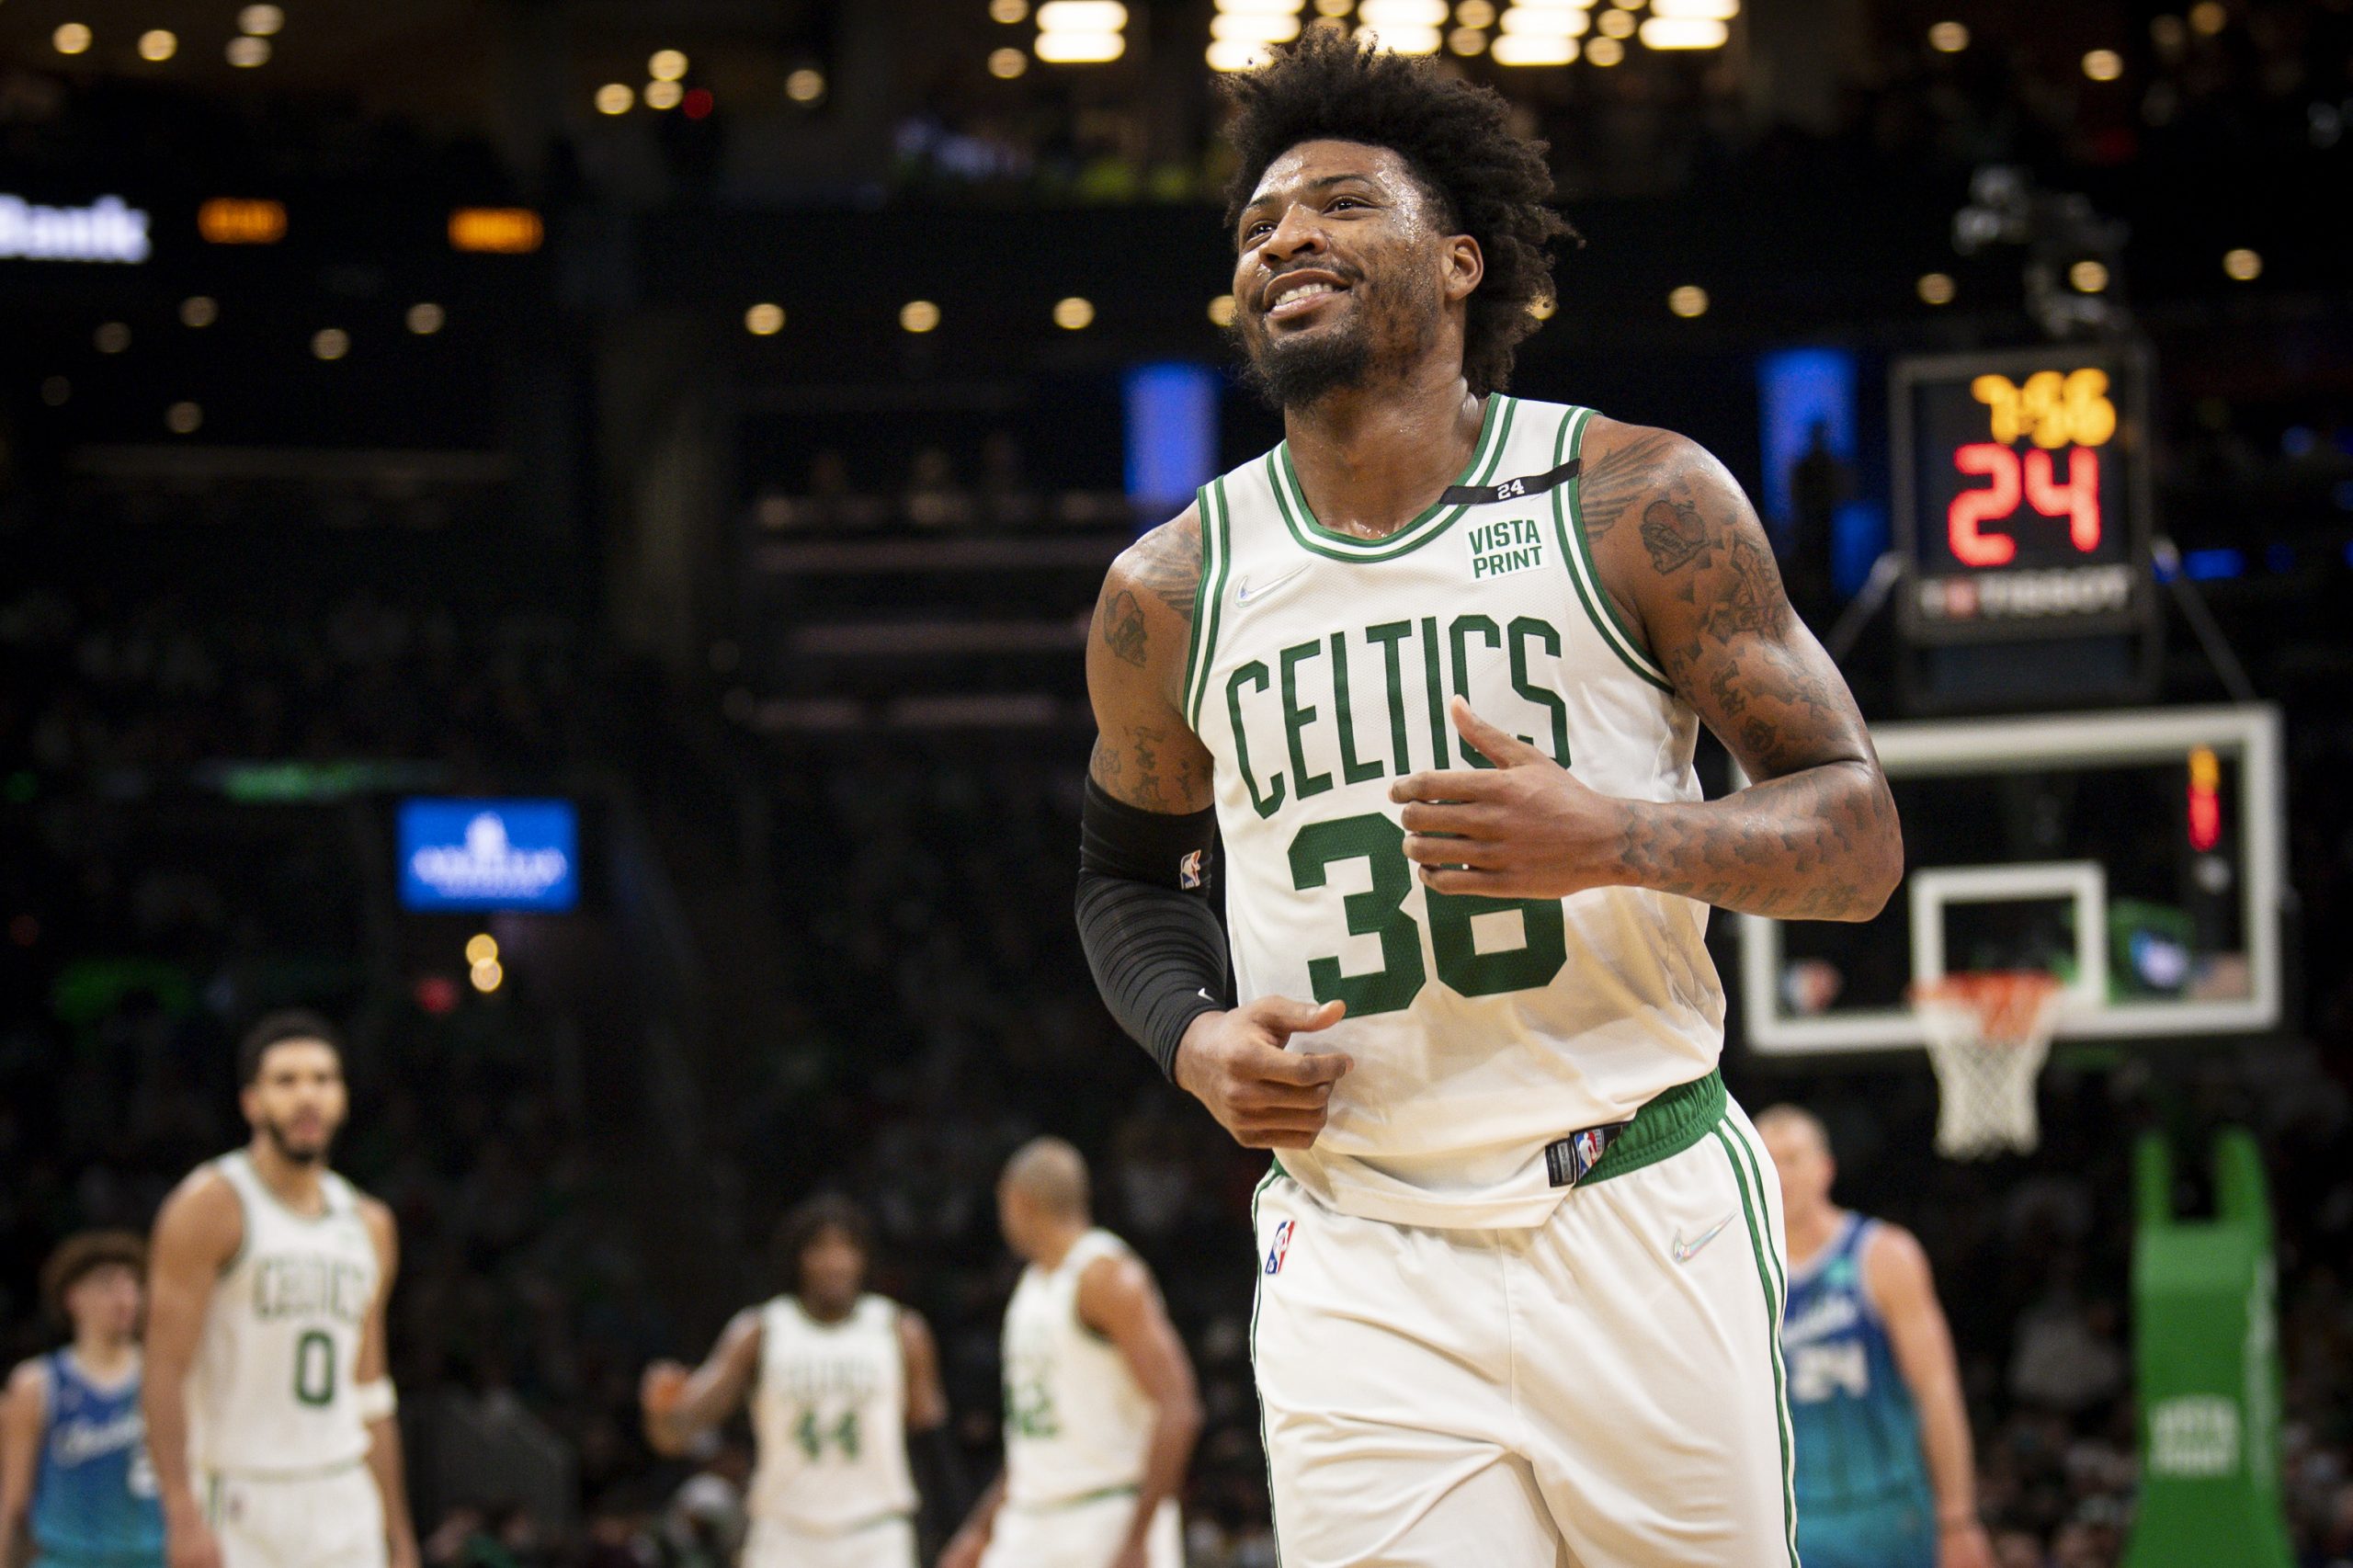 Marcus Smart of the Boston Celtics reacts during a game against the Charlotte Hornets.